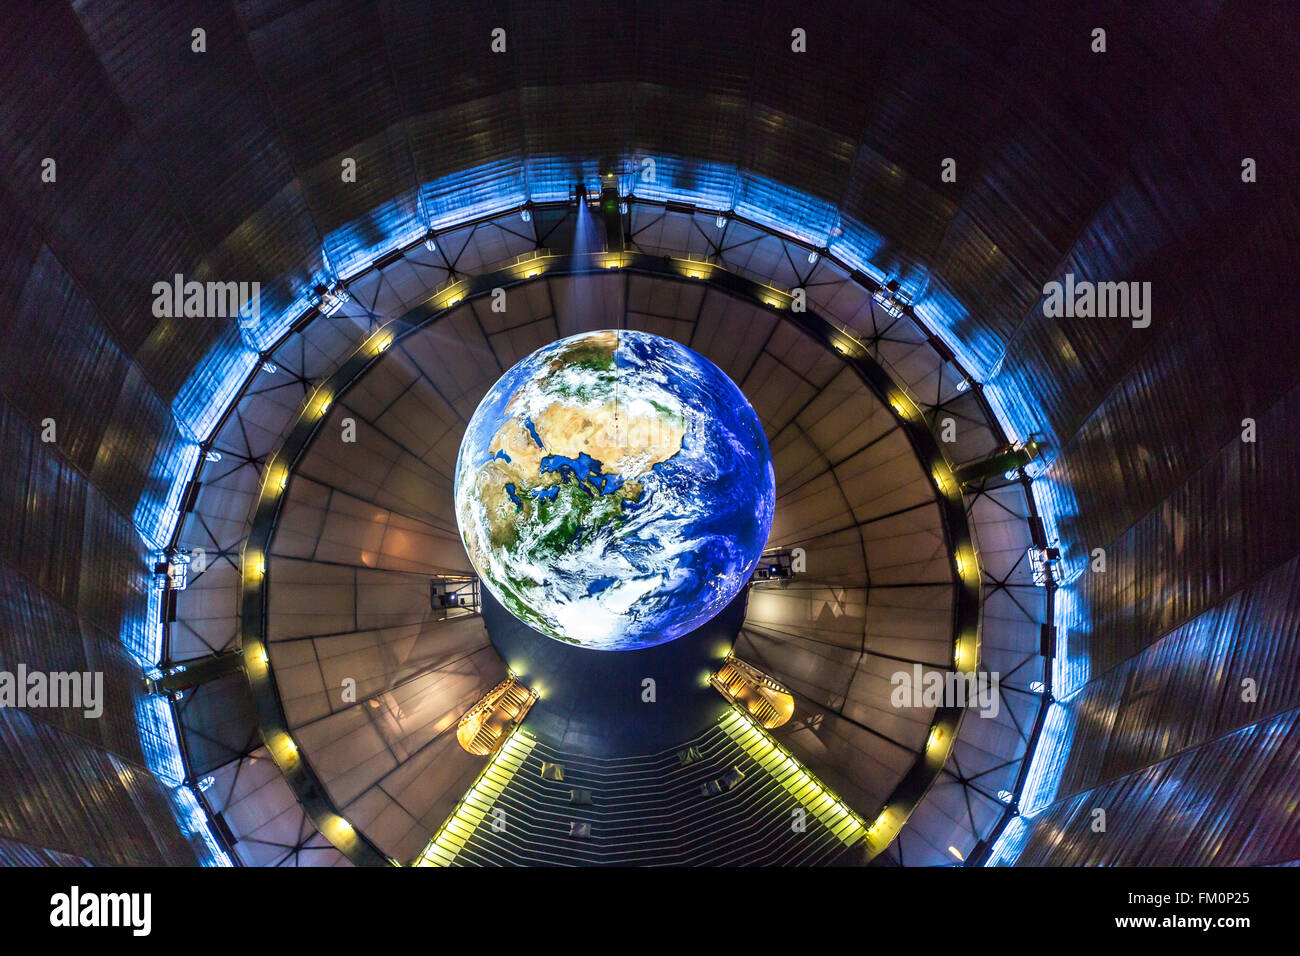 The Gasometer in Oberhausen, Germany, Europe's highest exhibition hall, 117 Meter hight, new exhibition, Wonders of Nature, Stock Photo